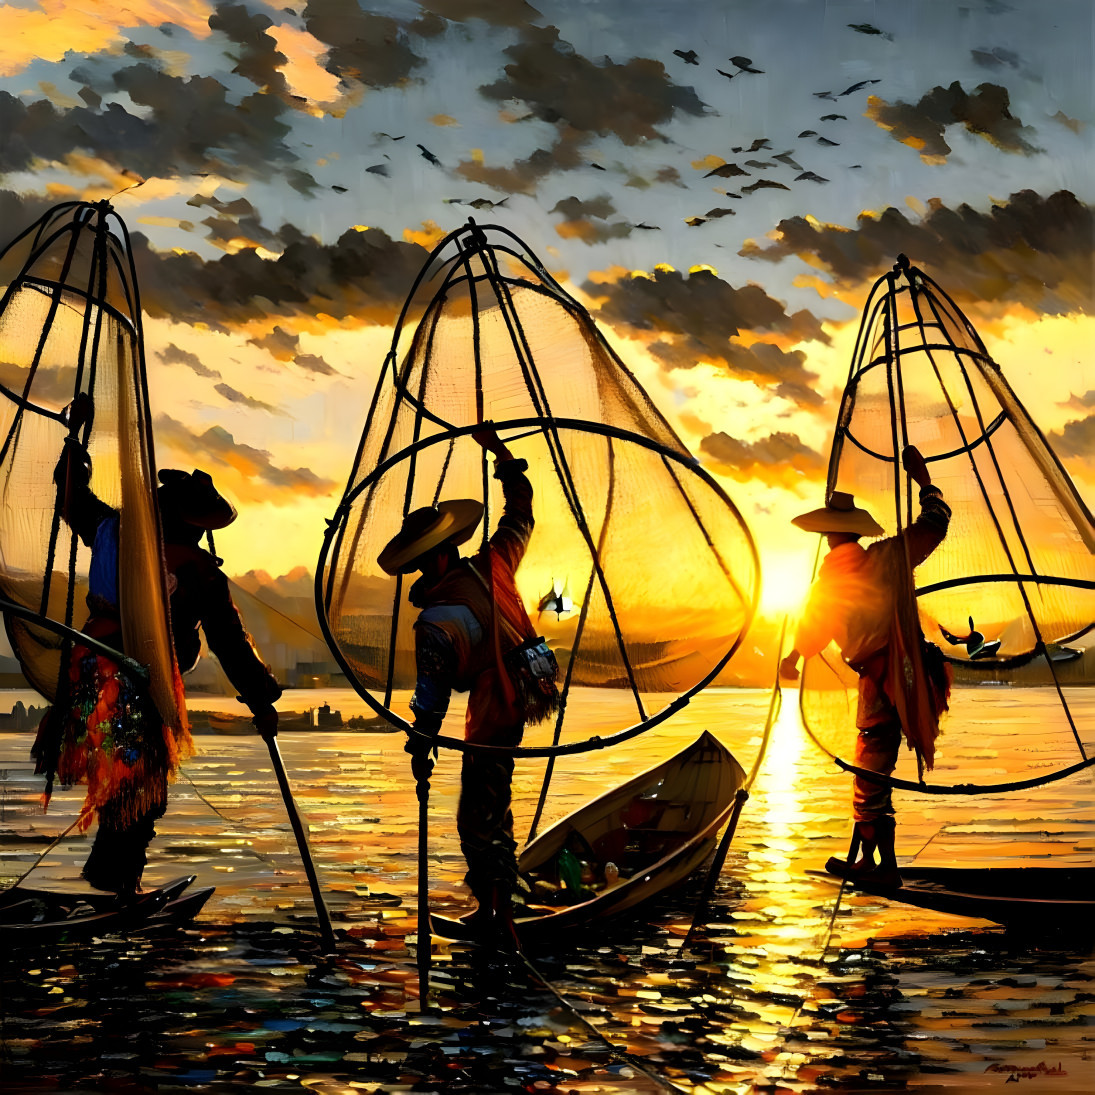  Chinese fishermen sail their graceful boats